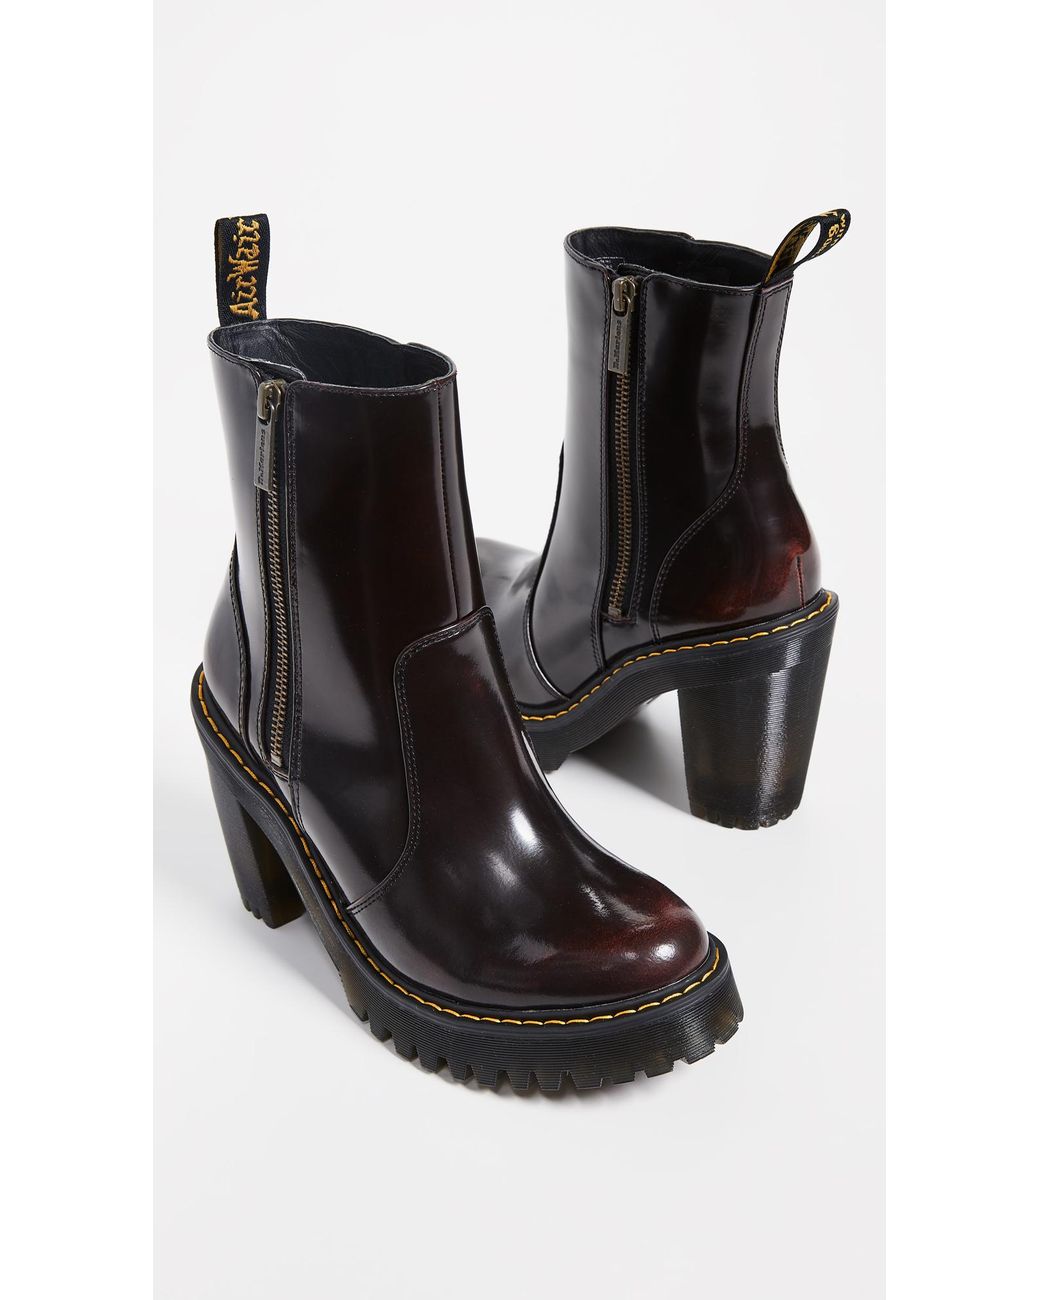 Fil Stereotype Støt Dr. Martens Magdalena Ii Ankle Boots in Black | Lyst Canada